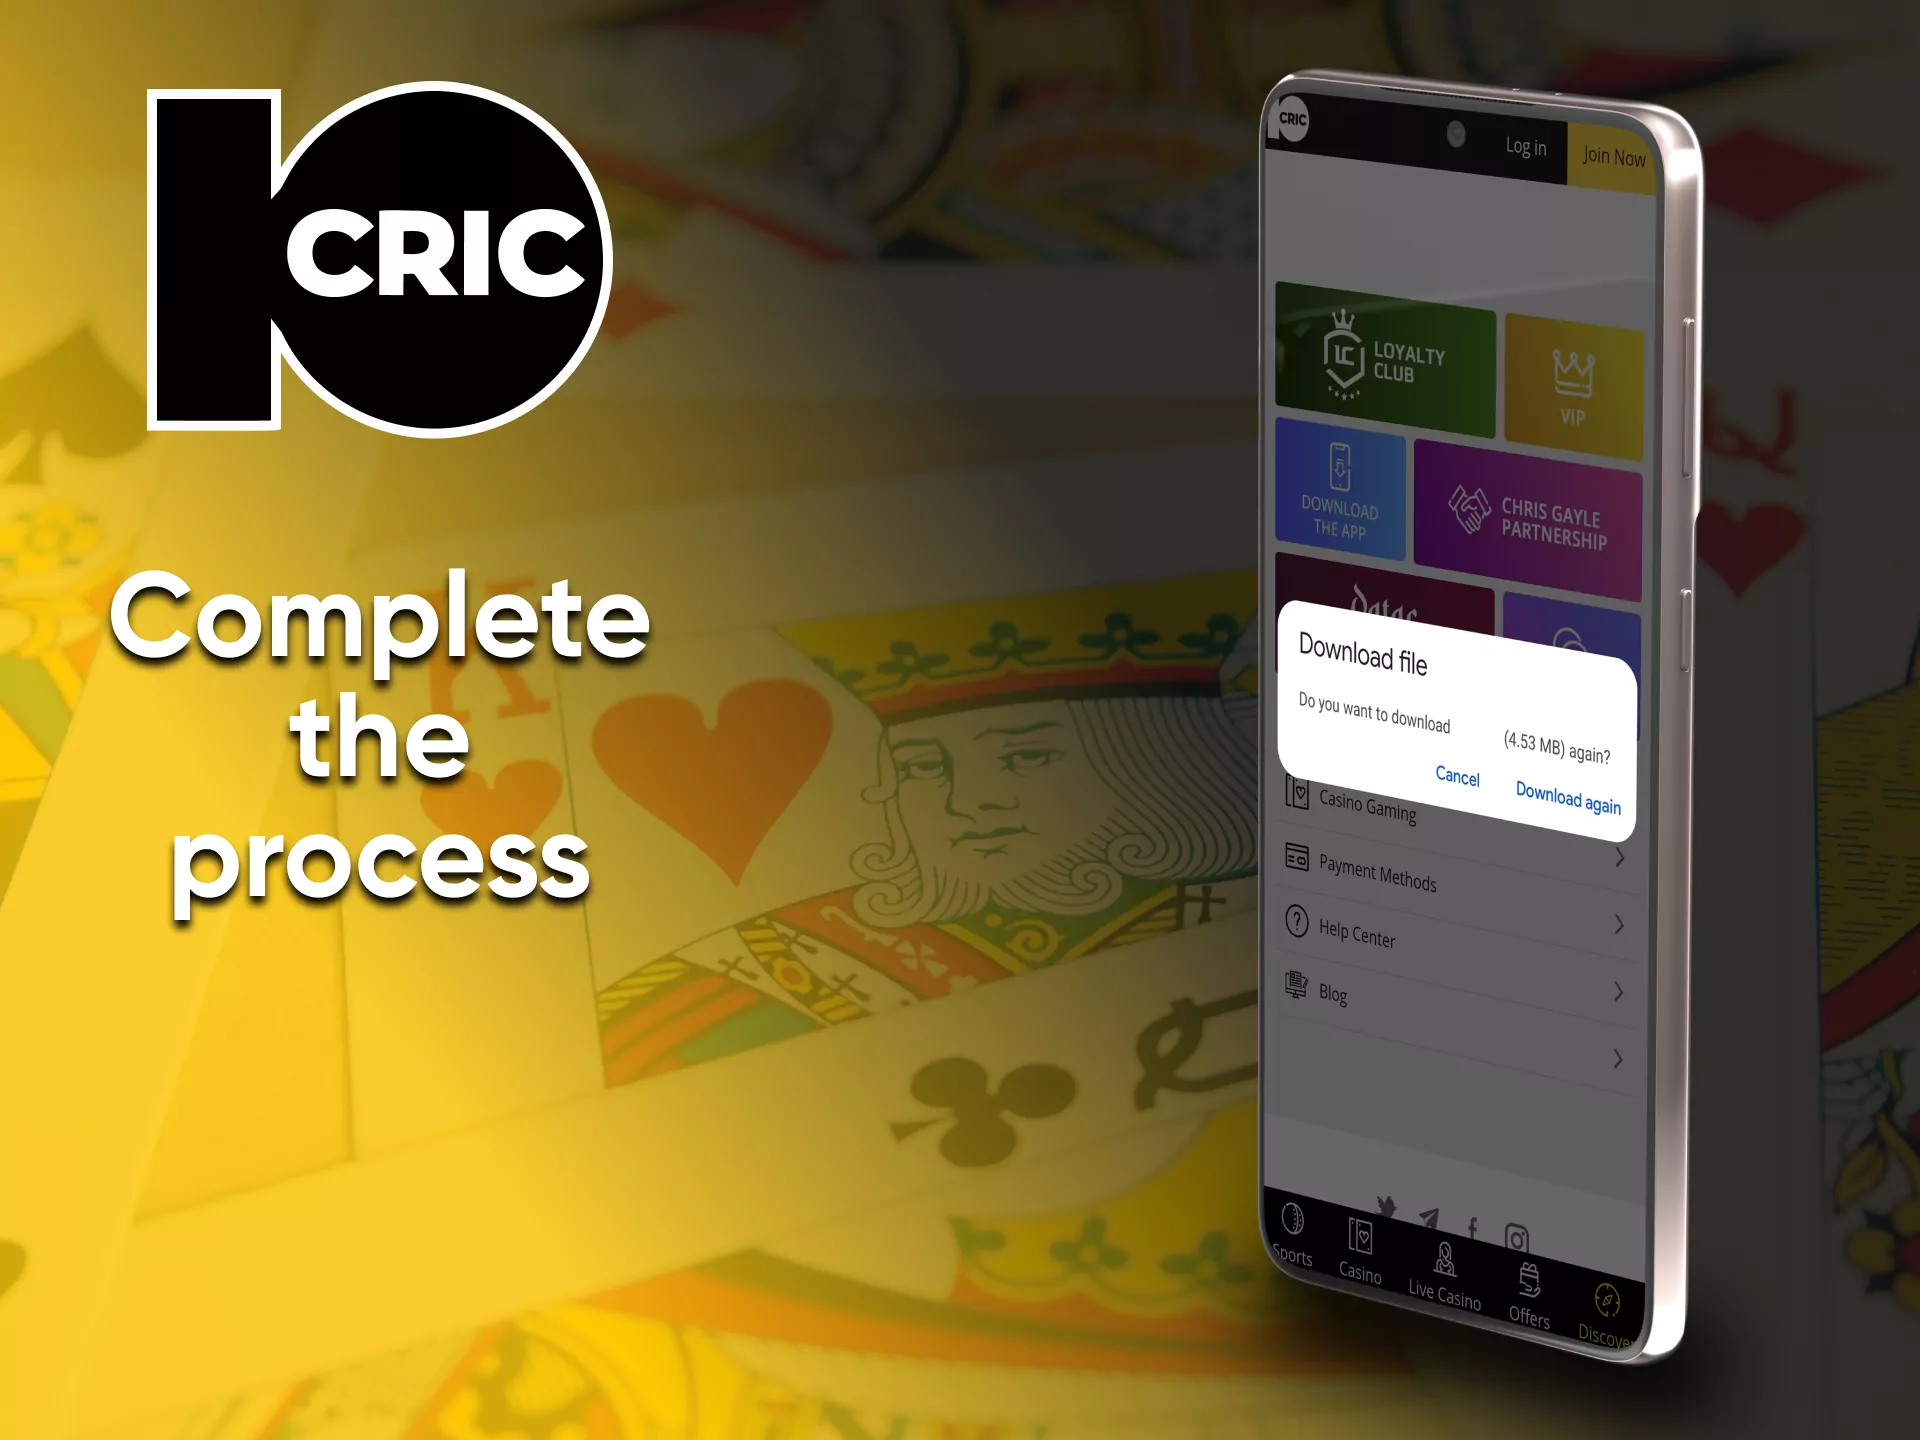 Install the application for casino games from 10Сric.